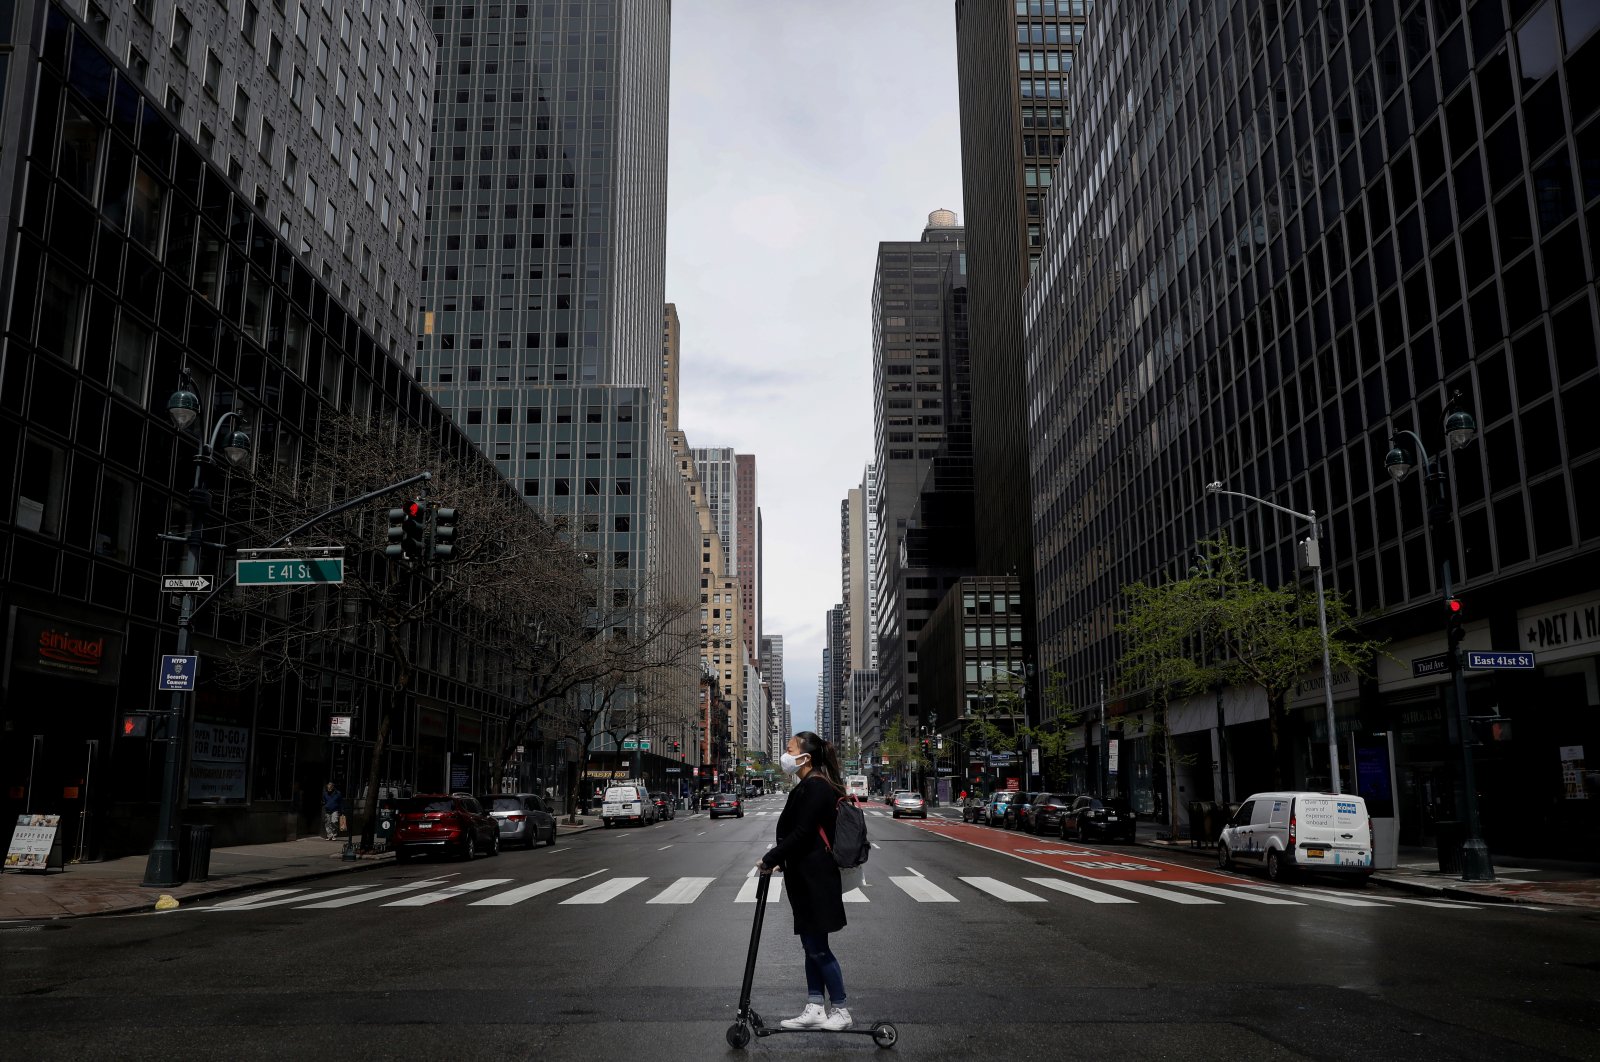 A woman wearing a protective face mask rides a scooter across a nearly empty 3rd Avenue in midtown Manhattan during the coronavirus outbreak, in New York City, New York, U.S., April 21, 2020. (Reuters Photo)